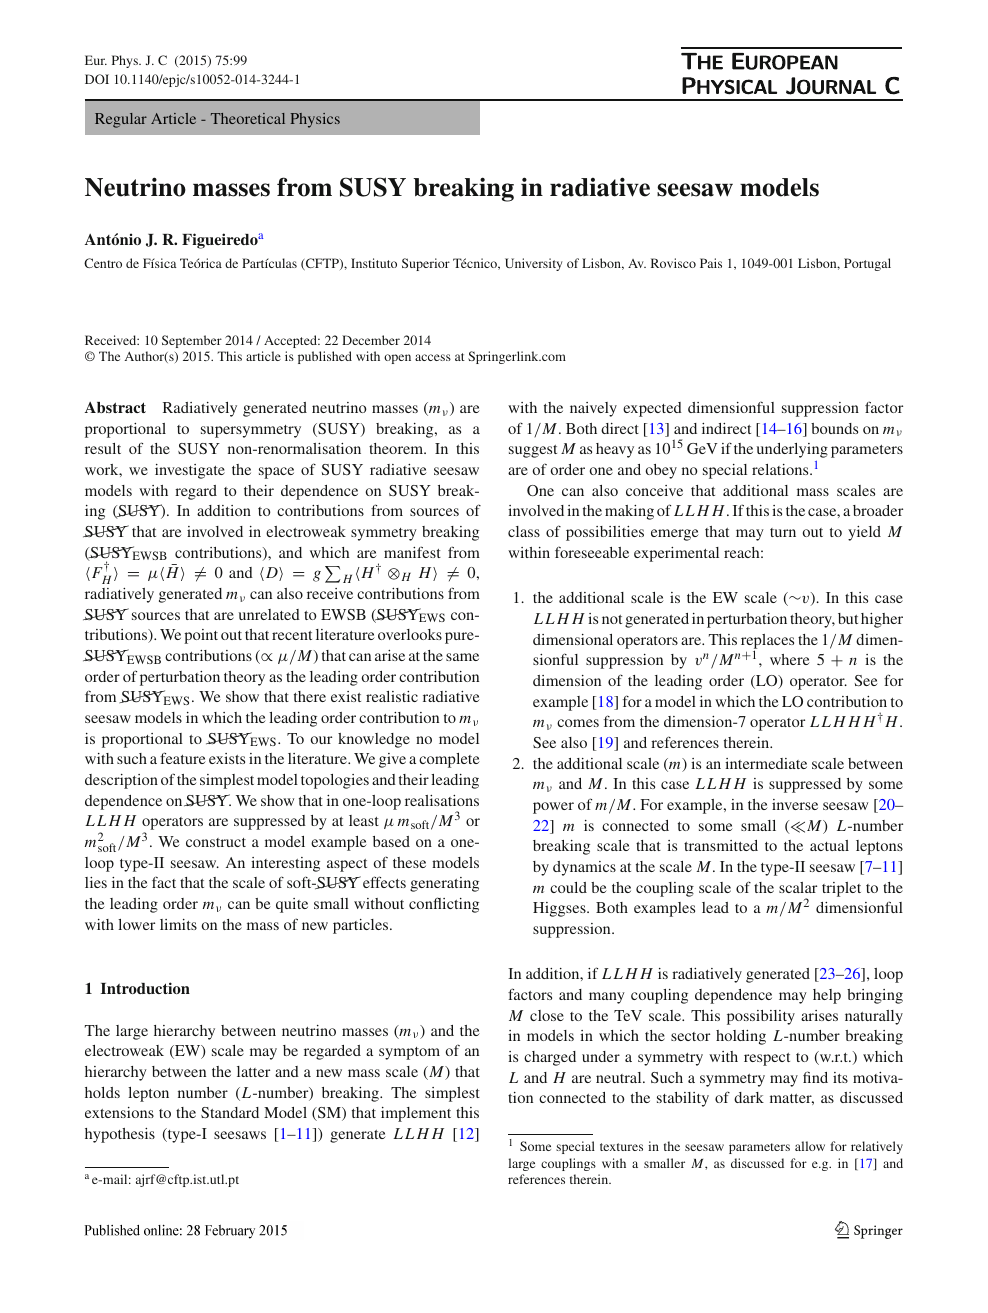 Neutrino Masses From Susy Breaking In Radiative Seesaw Models Topic Of Research Paper In Physical Sciences Download Scholarly Article Pdf And Read For Free On Cyberleninka Open Science Hub